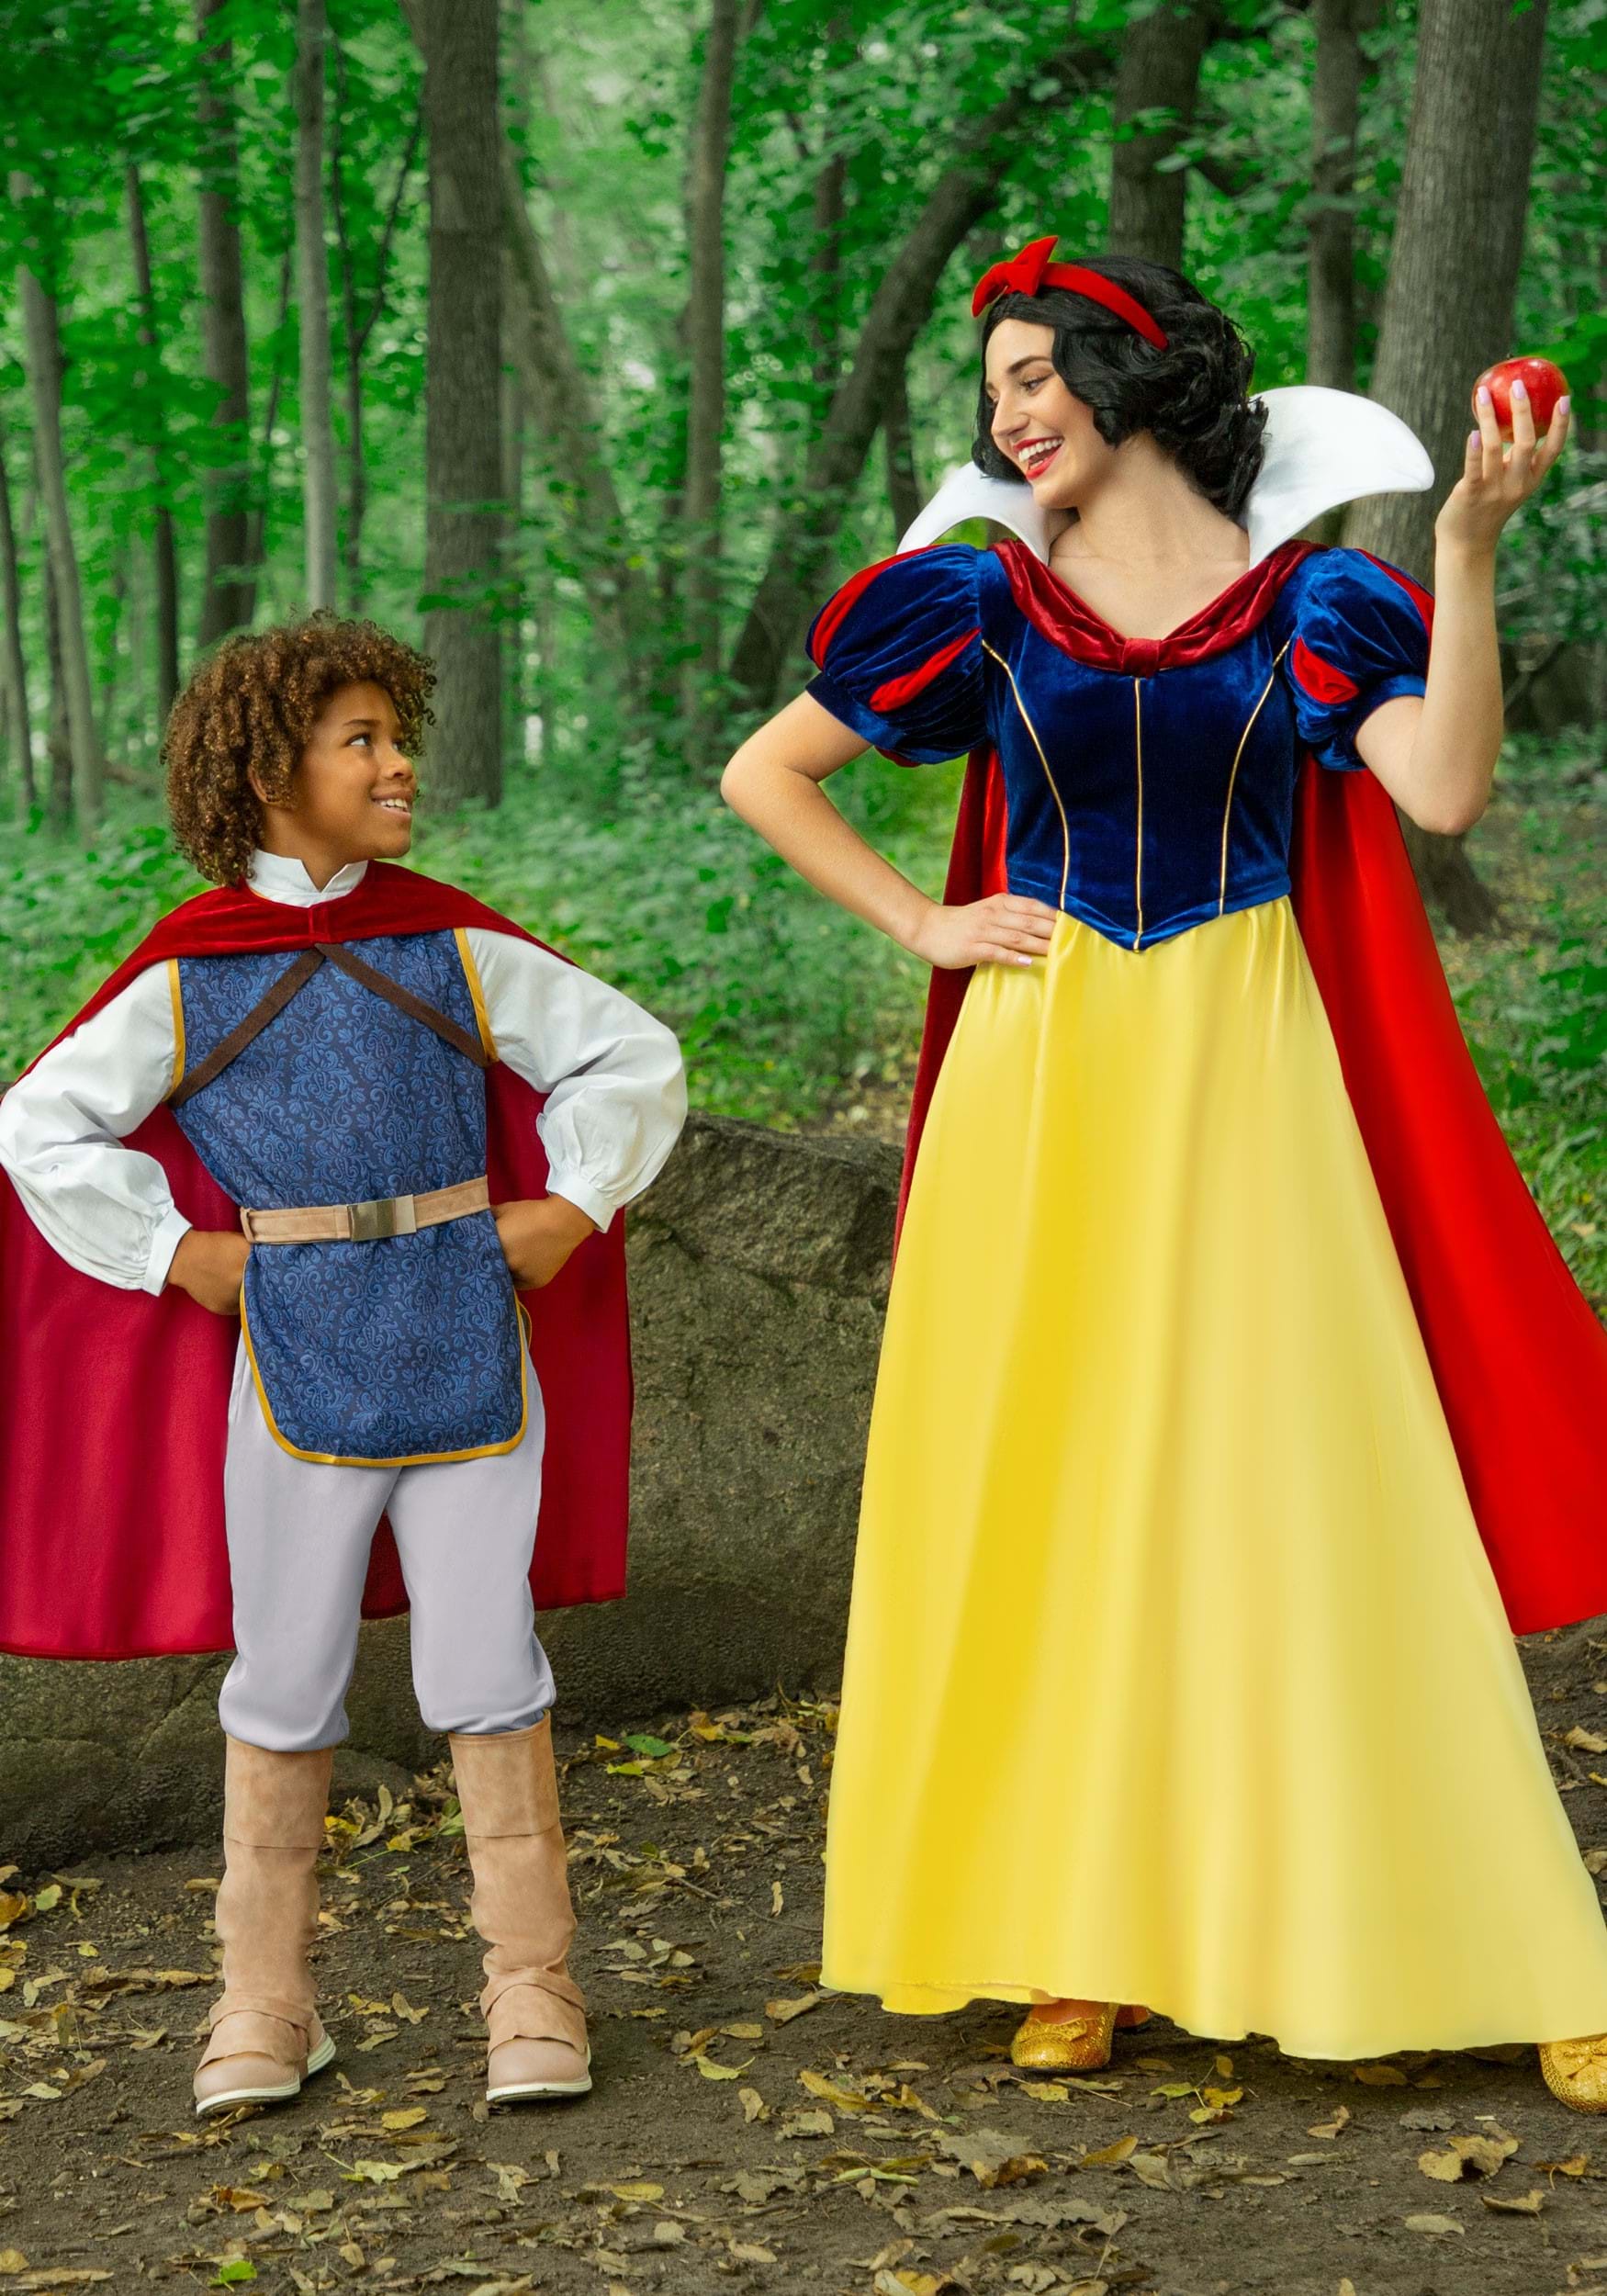 https://images.halloweencostumes.ca/products/68827/2-1-195318/child-snow-white-prince-costume-alt-6.jpg